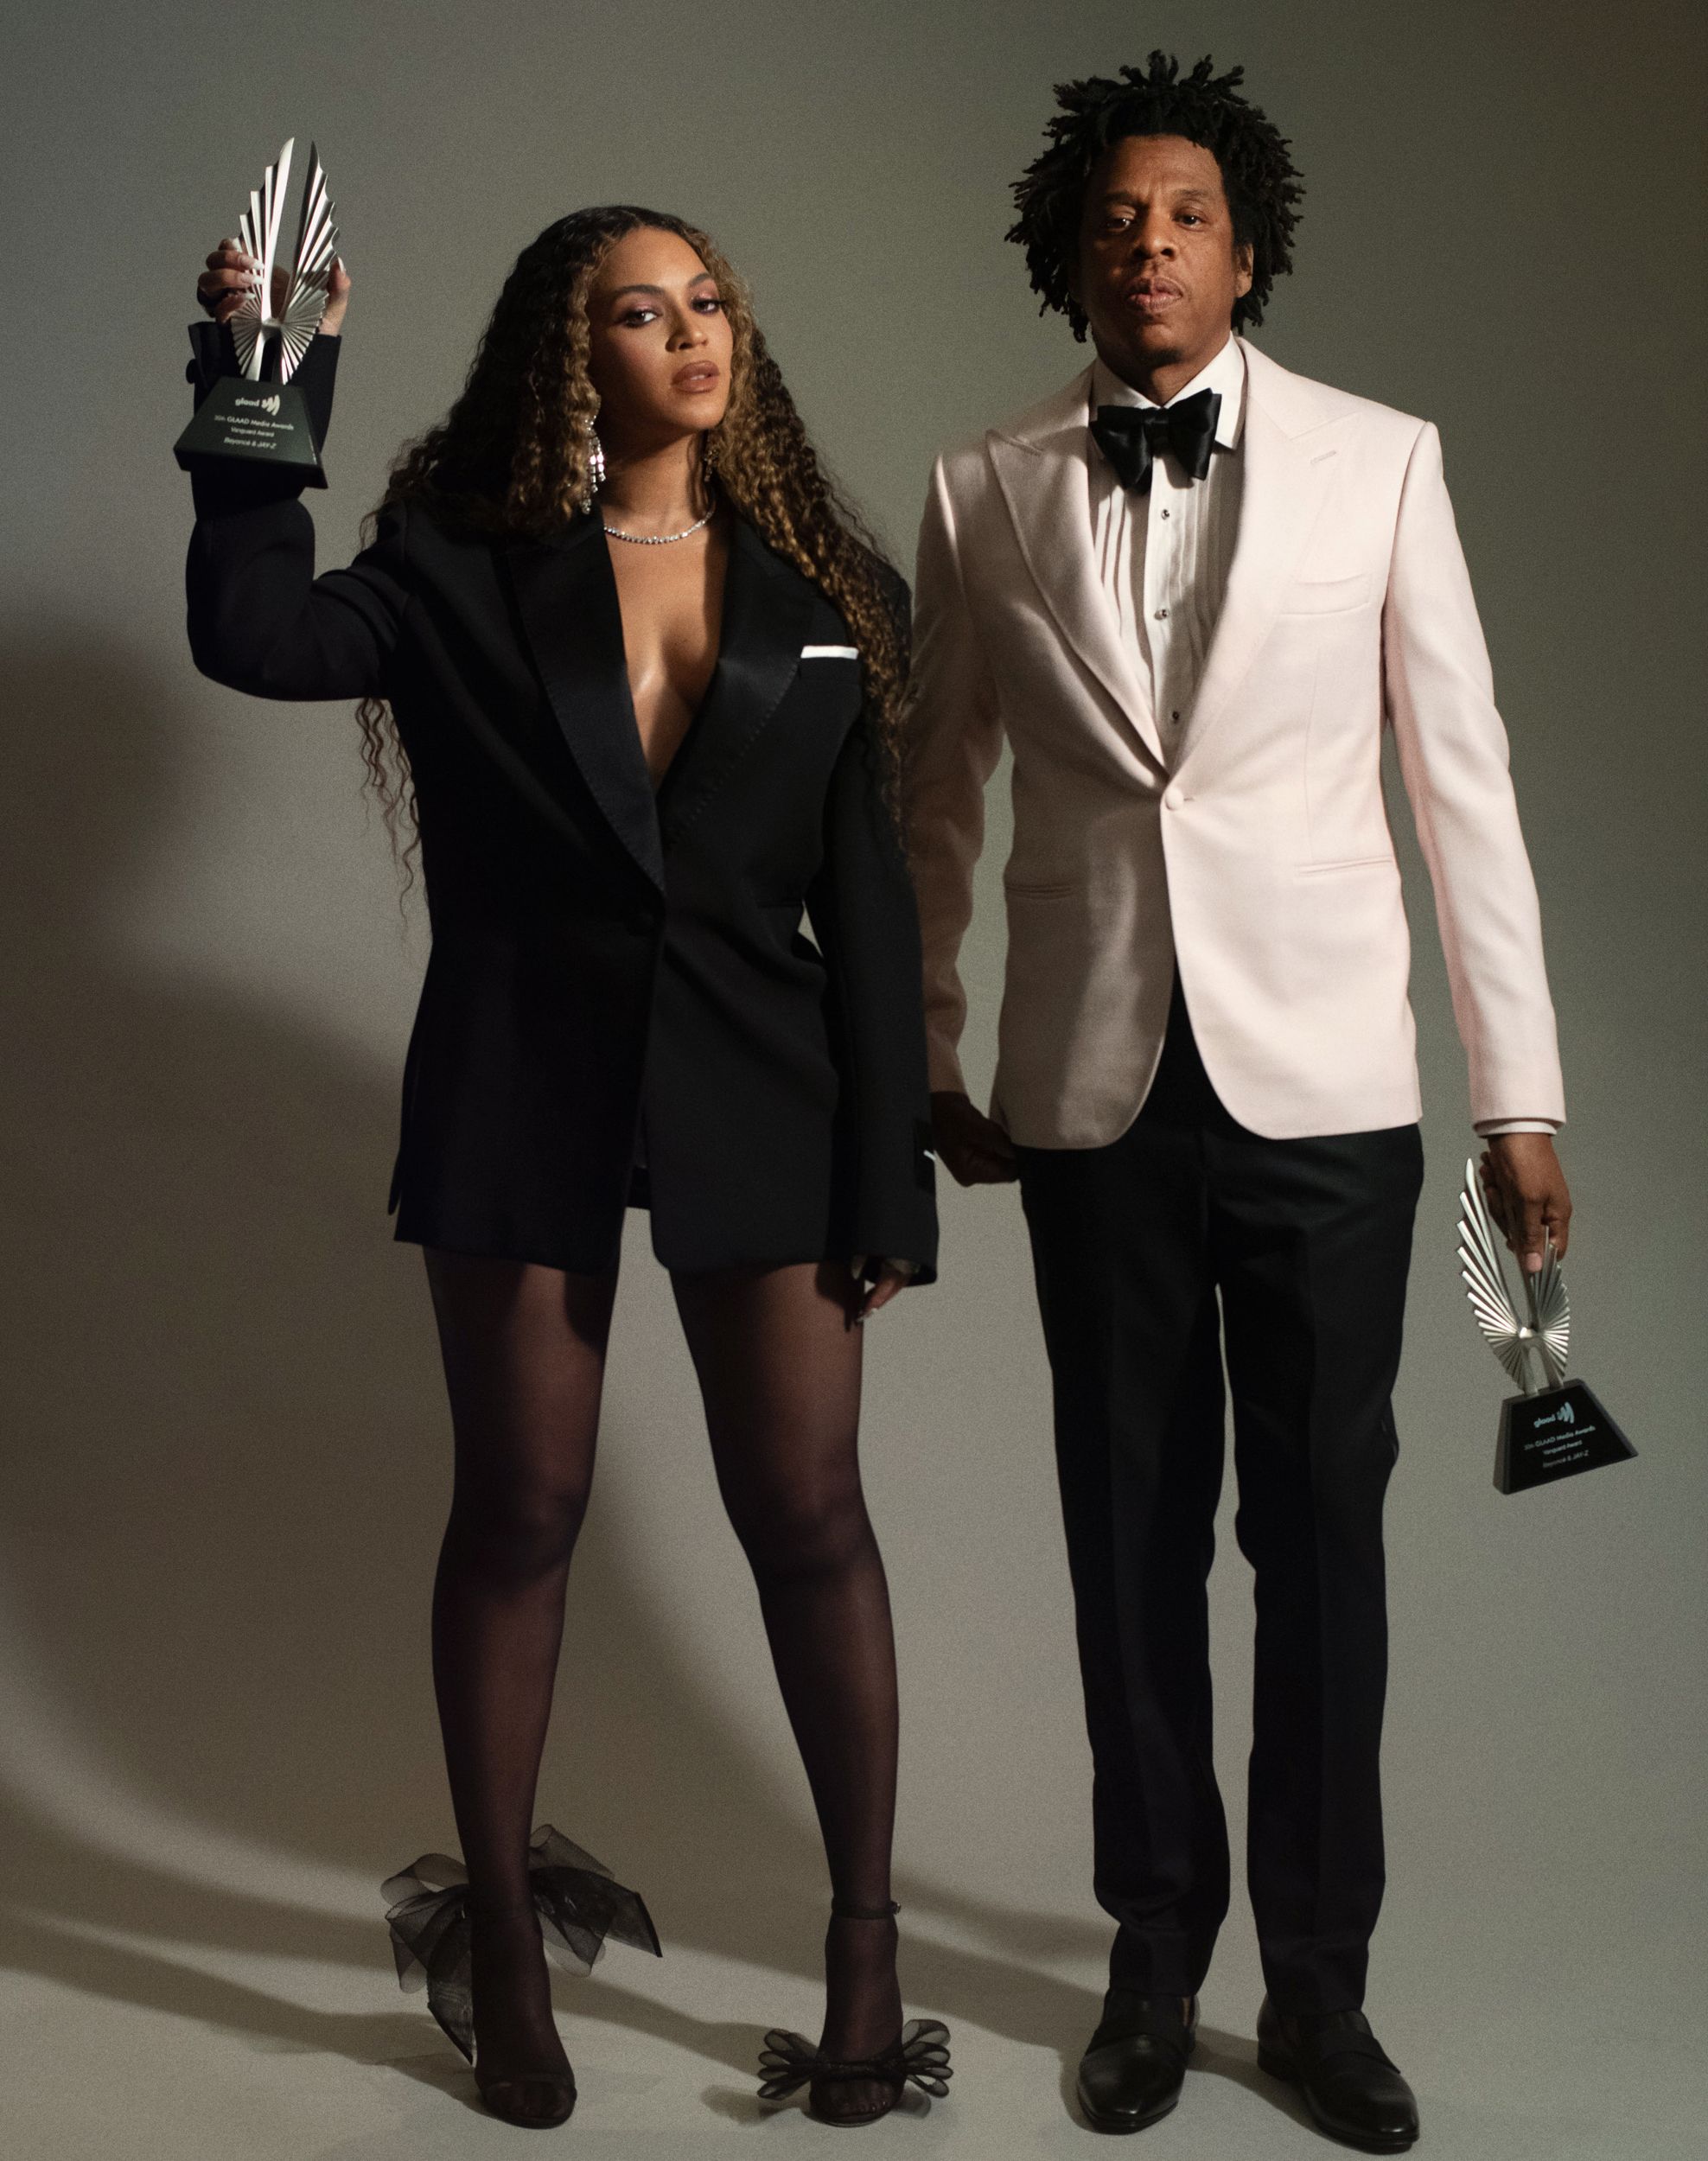 Beyonce and Jay-Z at the Glaad Awards